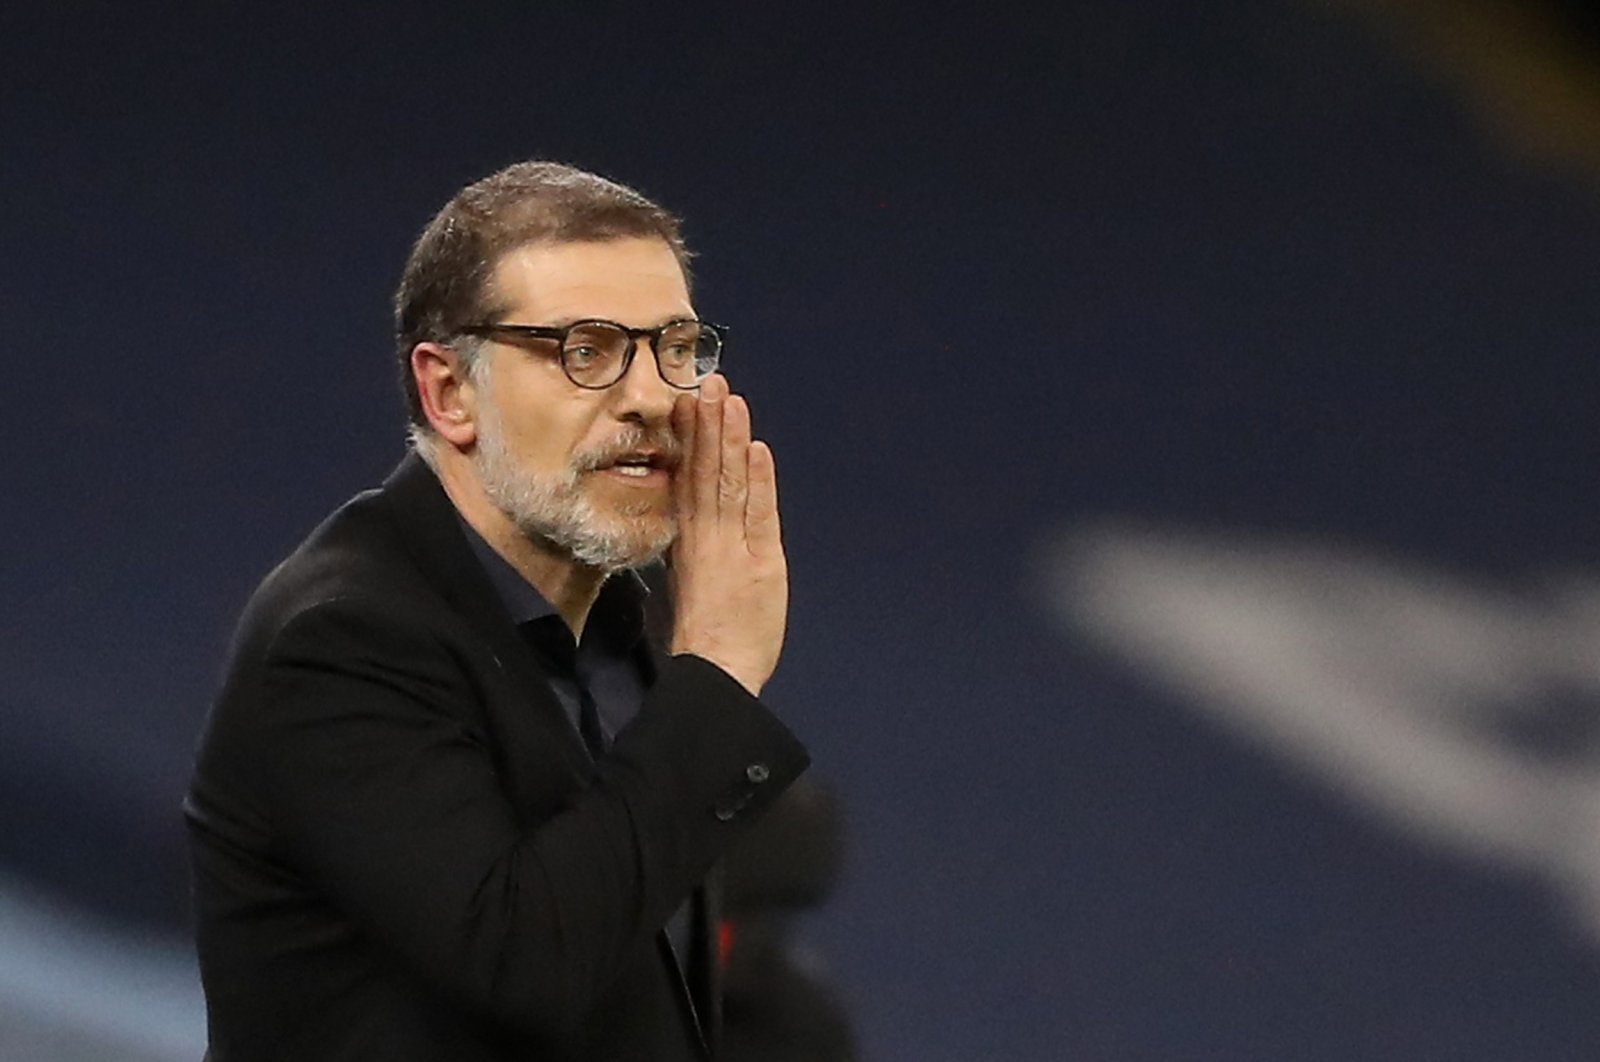 West Bromwich Albion manager Slaven Bilic reacts during a Premier League match against Manchester City at the Etihad Stadium in Manchester, Britain, Dec. 15, 2020. (Reuters Photo)